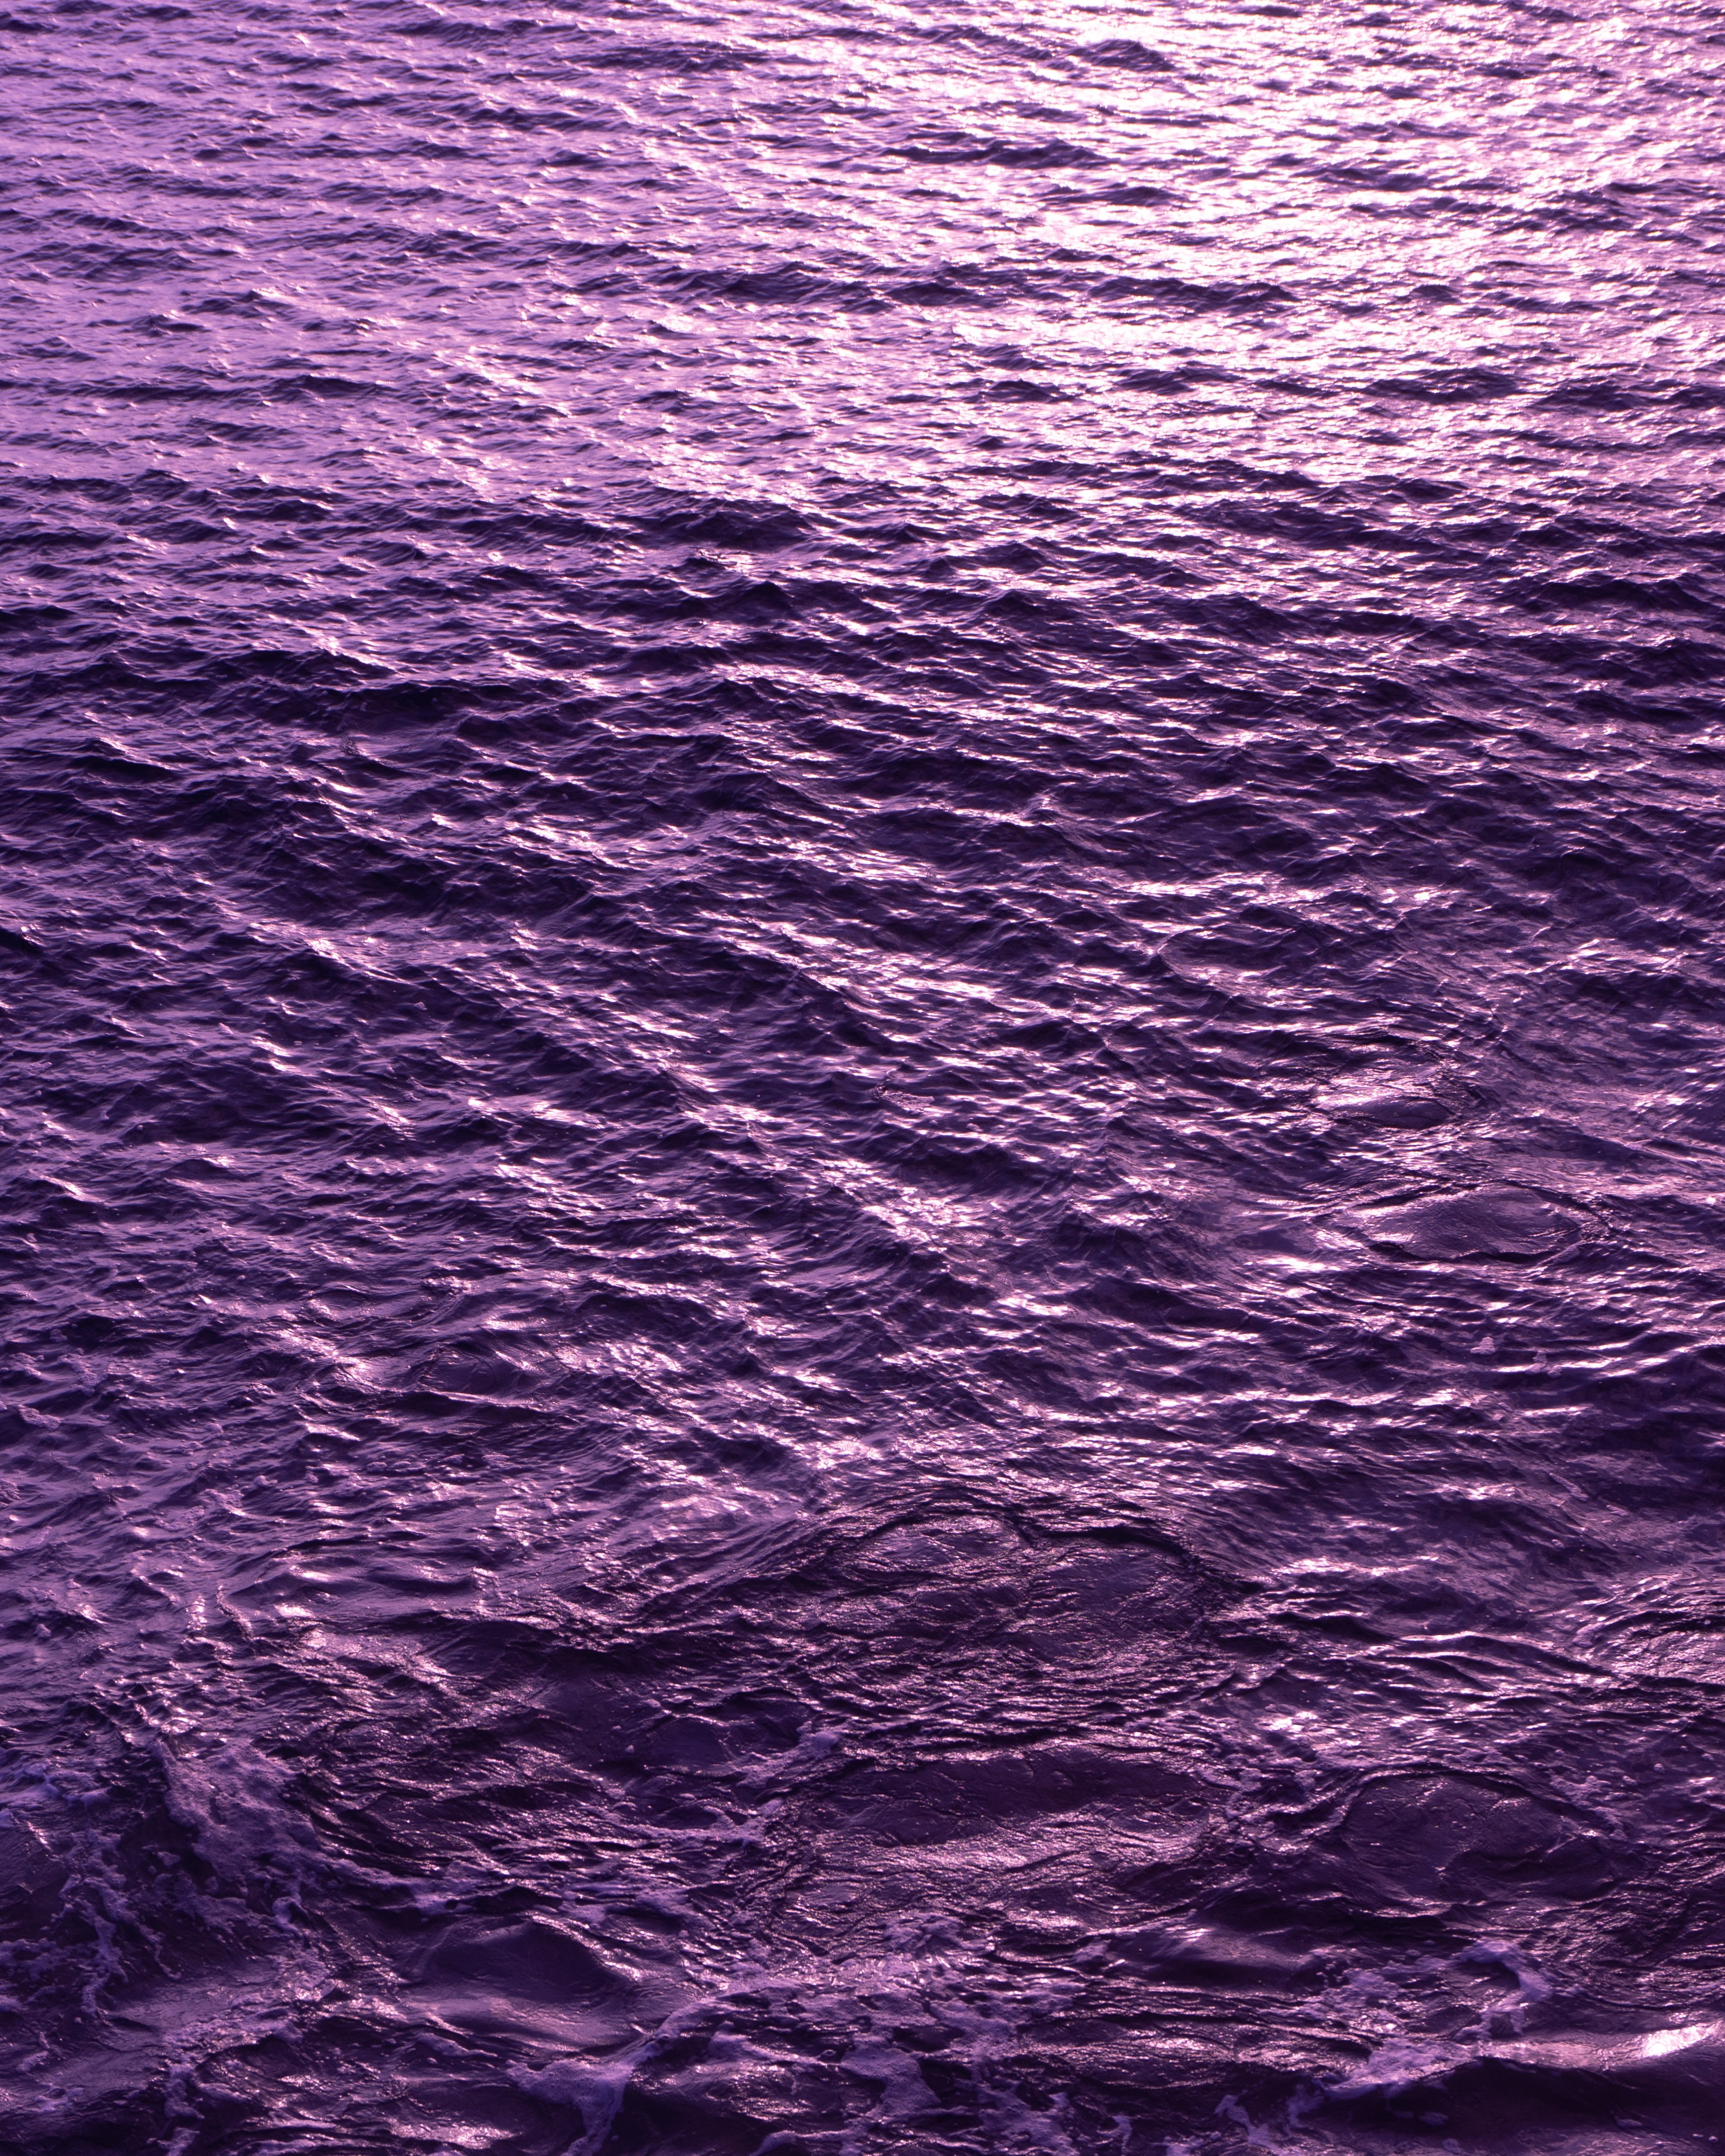 purple, surface, water, nature, waves, violet, ripples, ripple for android